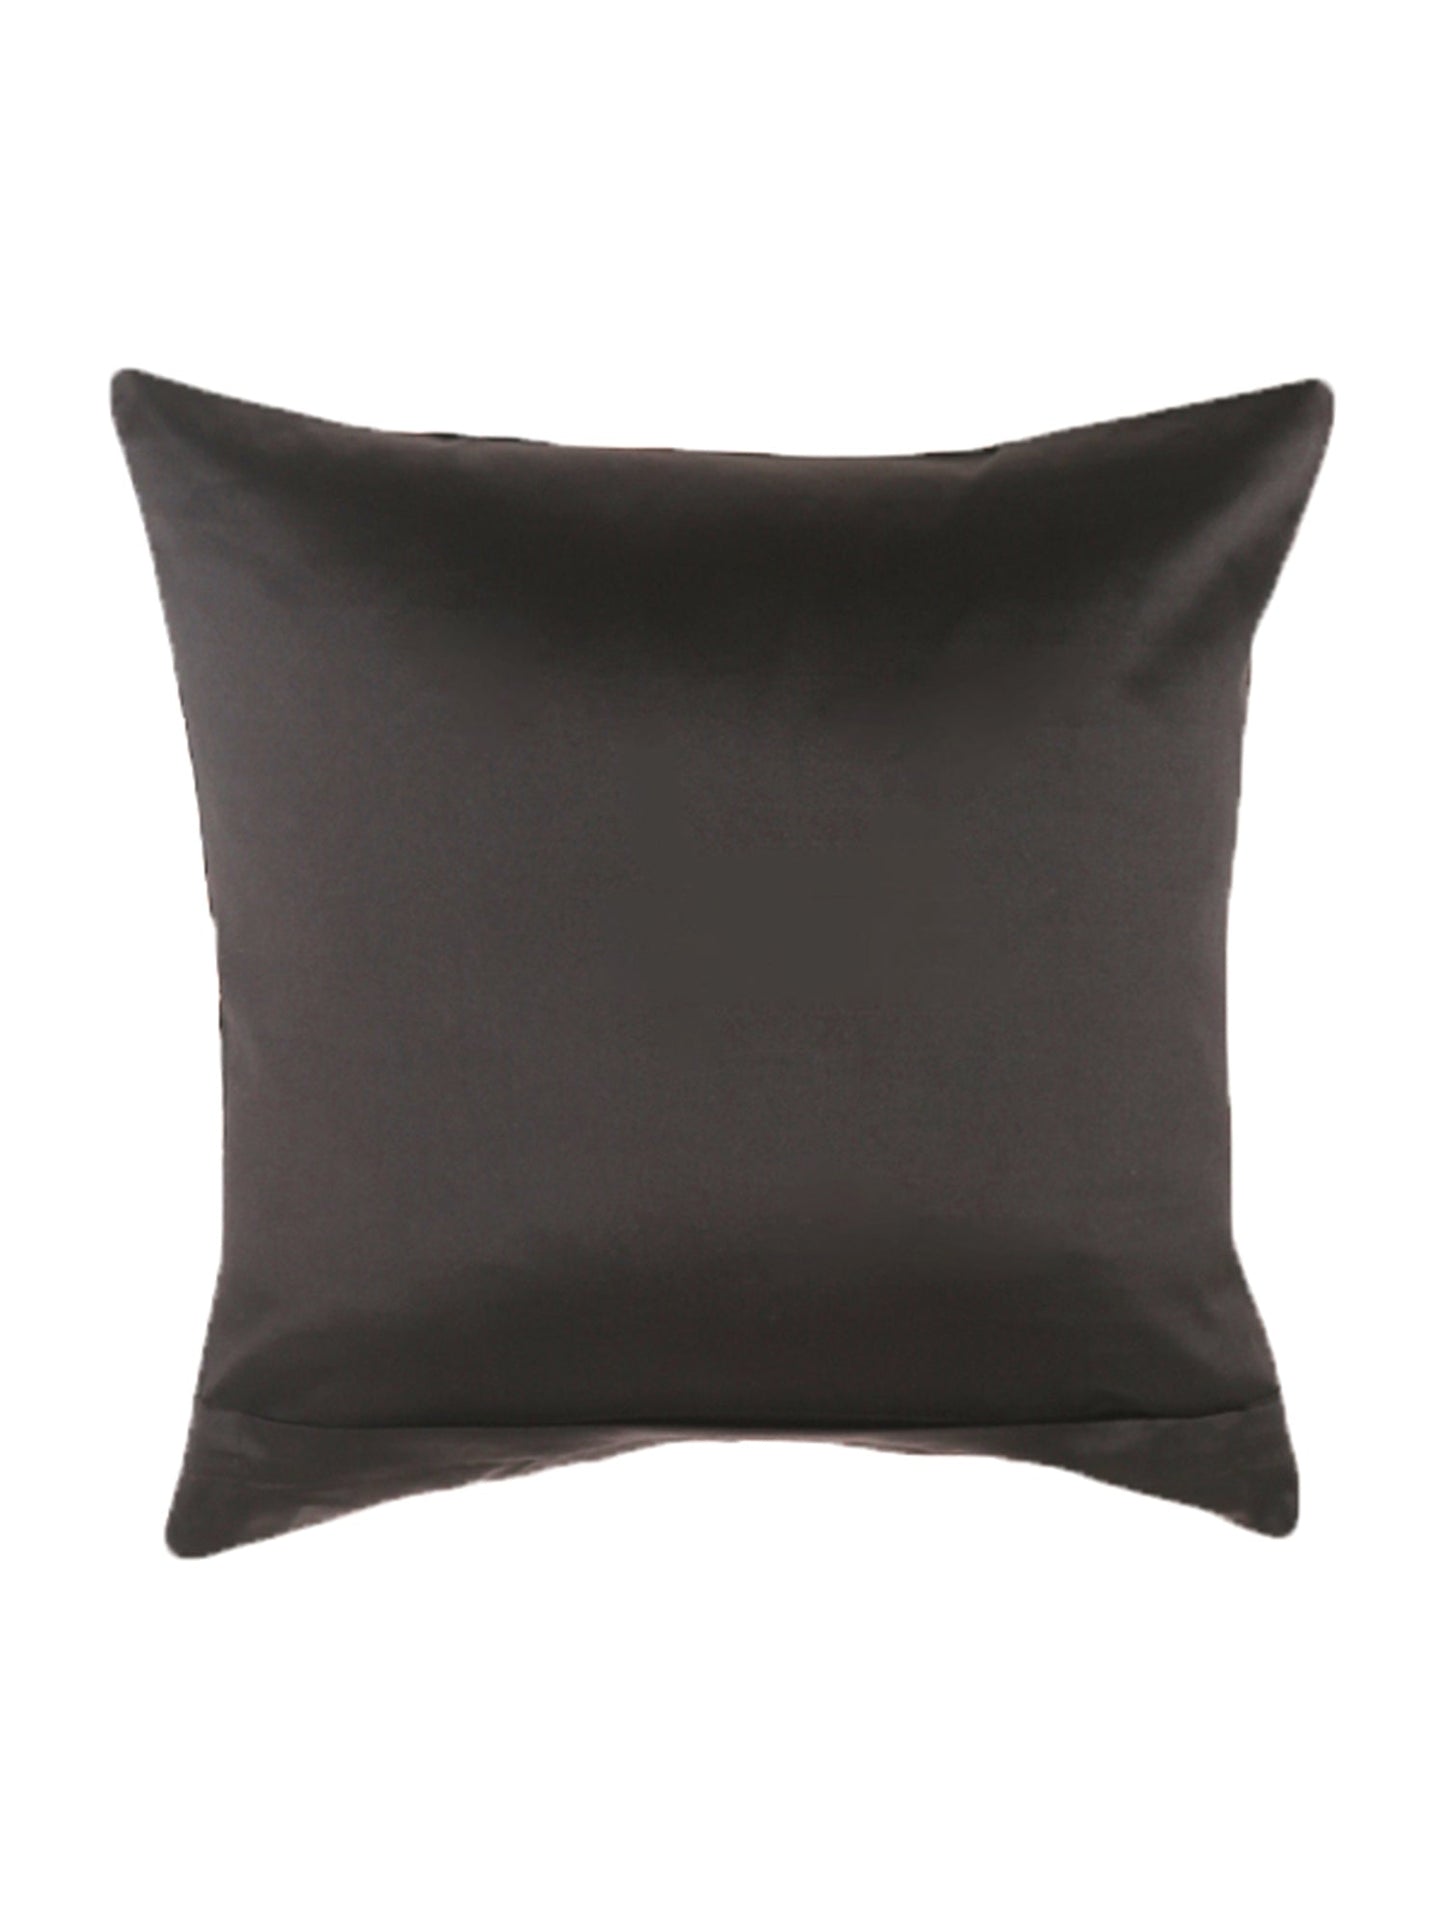 Technique Cushion Cover 100% Polyester  Black - 16" X 16"